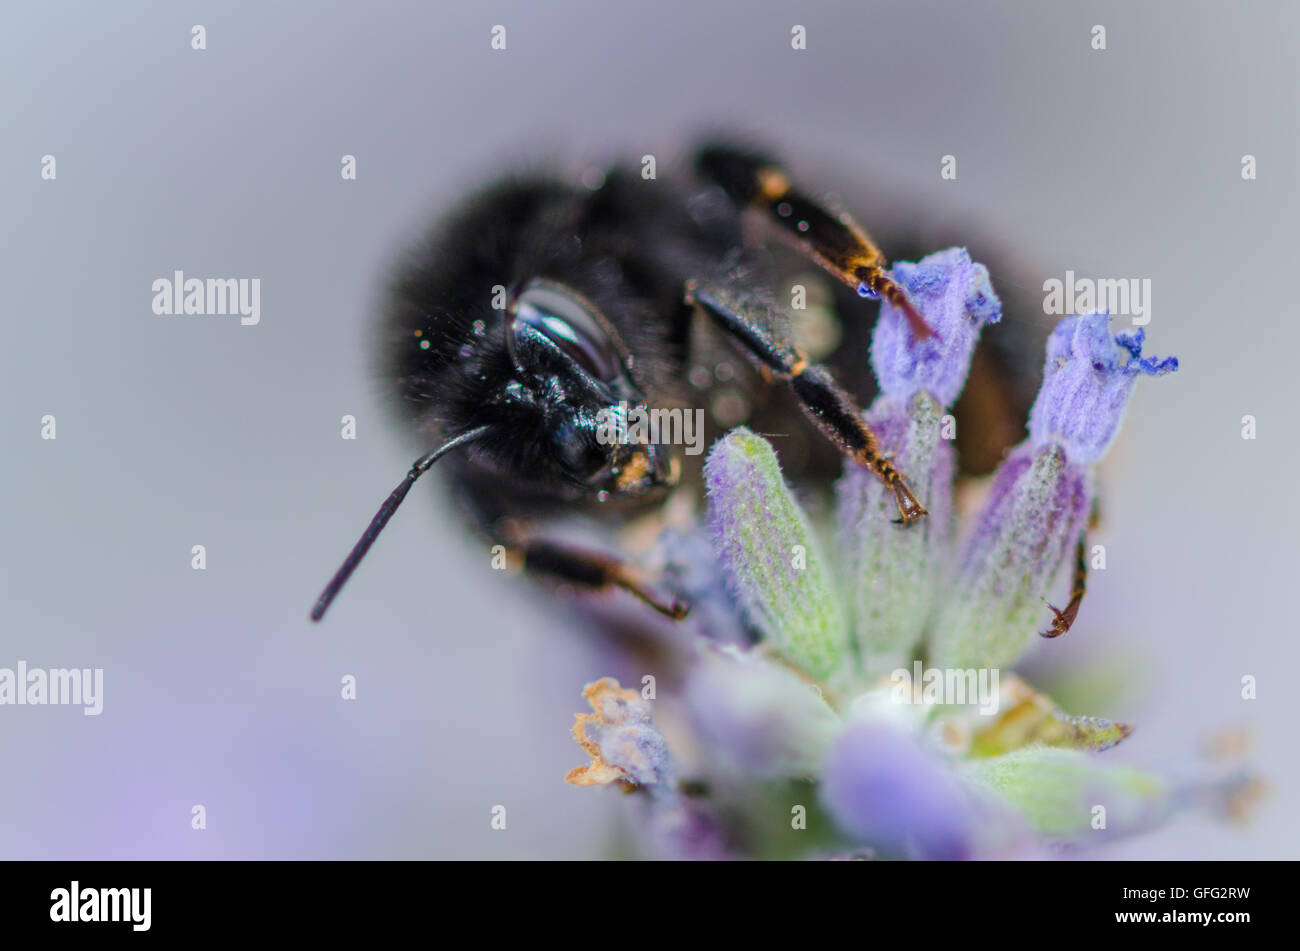 Bees on Lavender plants Stock Photo